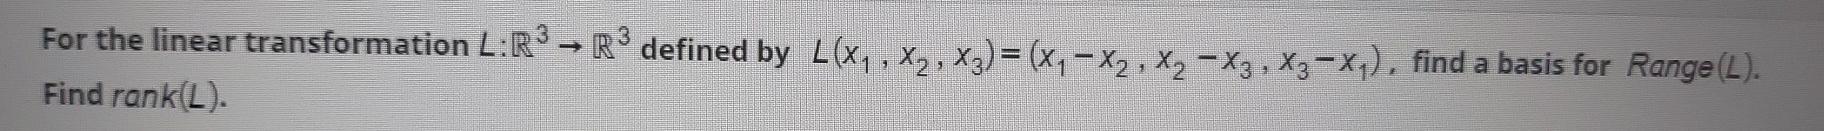 For The Linear Transformation L R Ro Defined By L X Xz Xz X4 X2 X2 X3 X1 Find A Basis For Range L 1